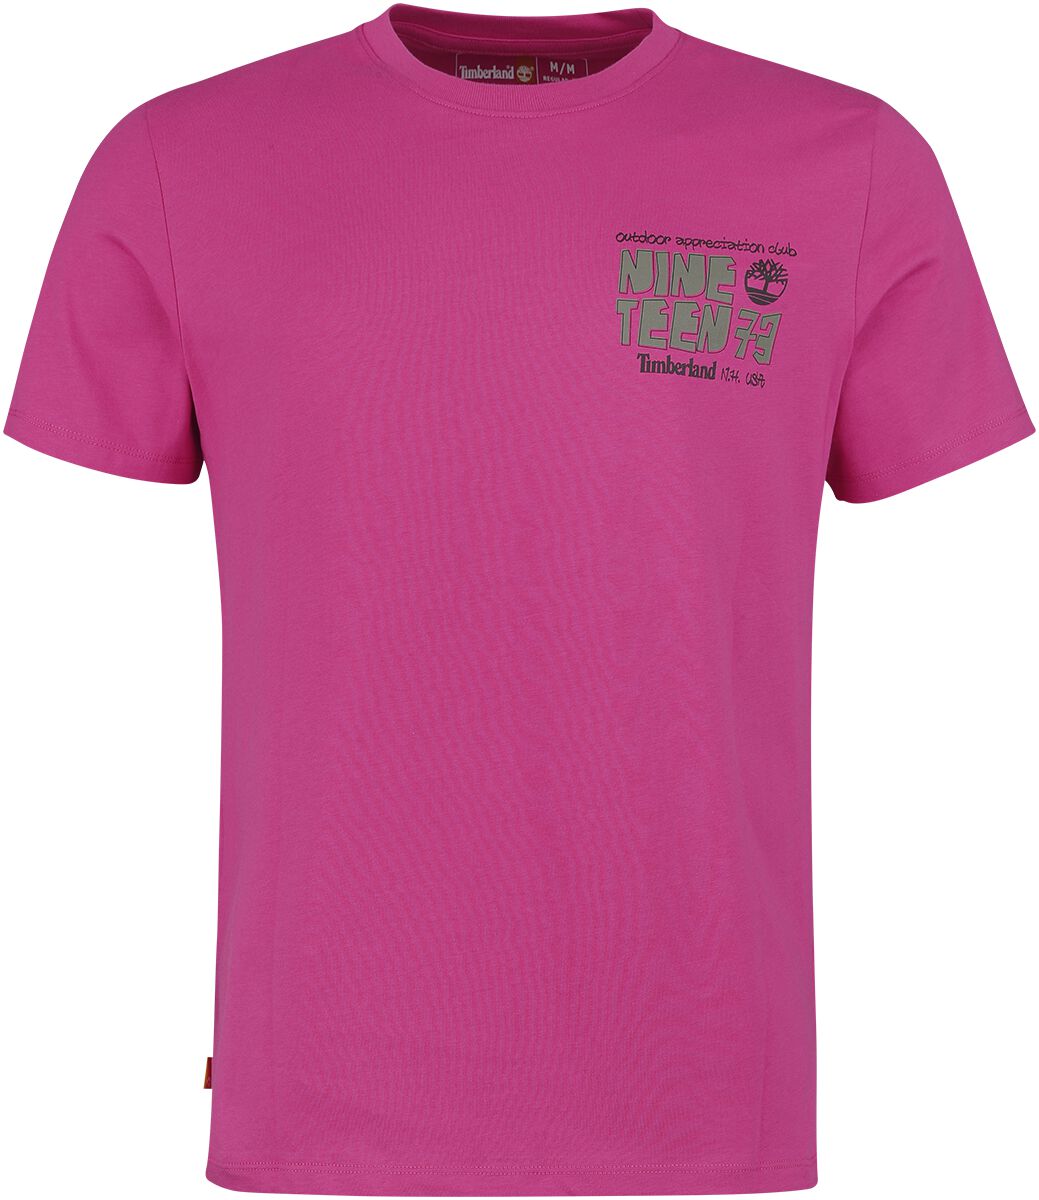 Timberland Outdoor Back Graphic Tee T-Shirt pink in L